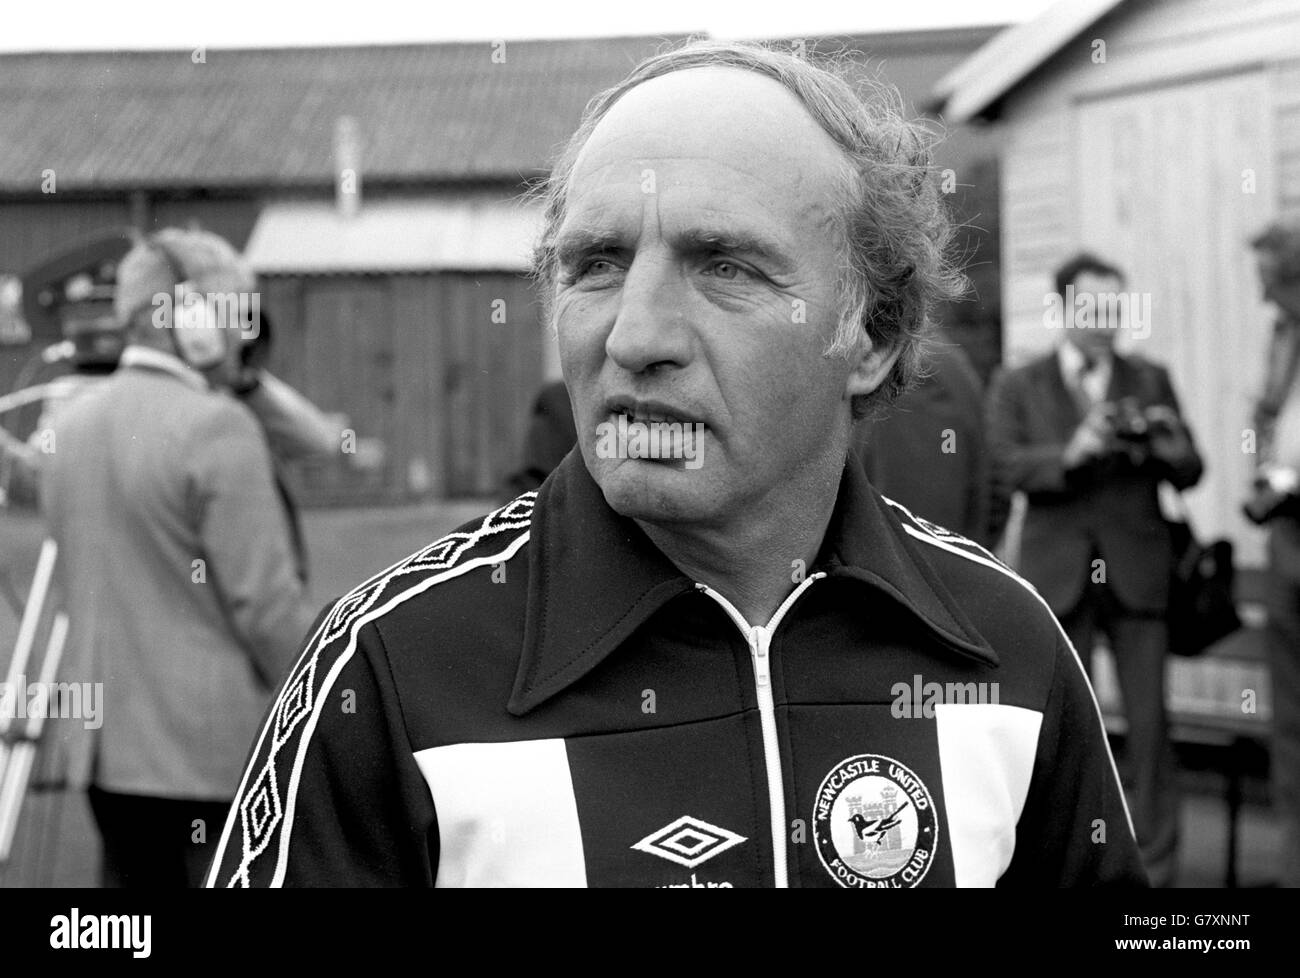 Soccer - Newcastle United Pre Season Photocall. Bill McGarry, manager of Newcastle United. Stock Photo